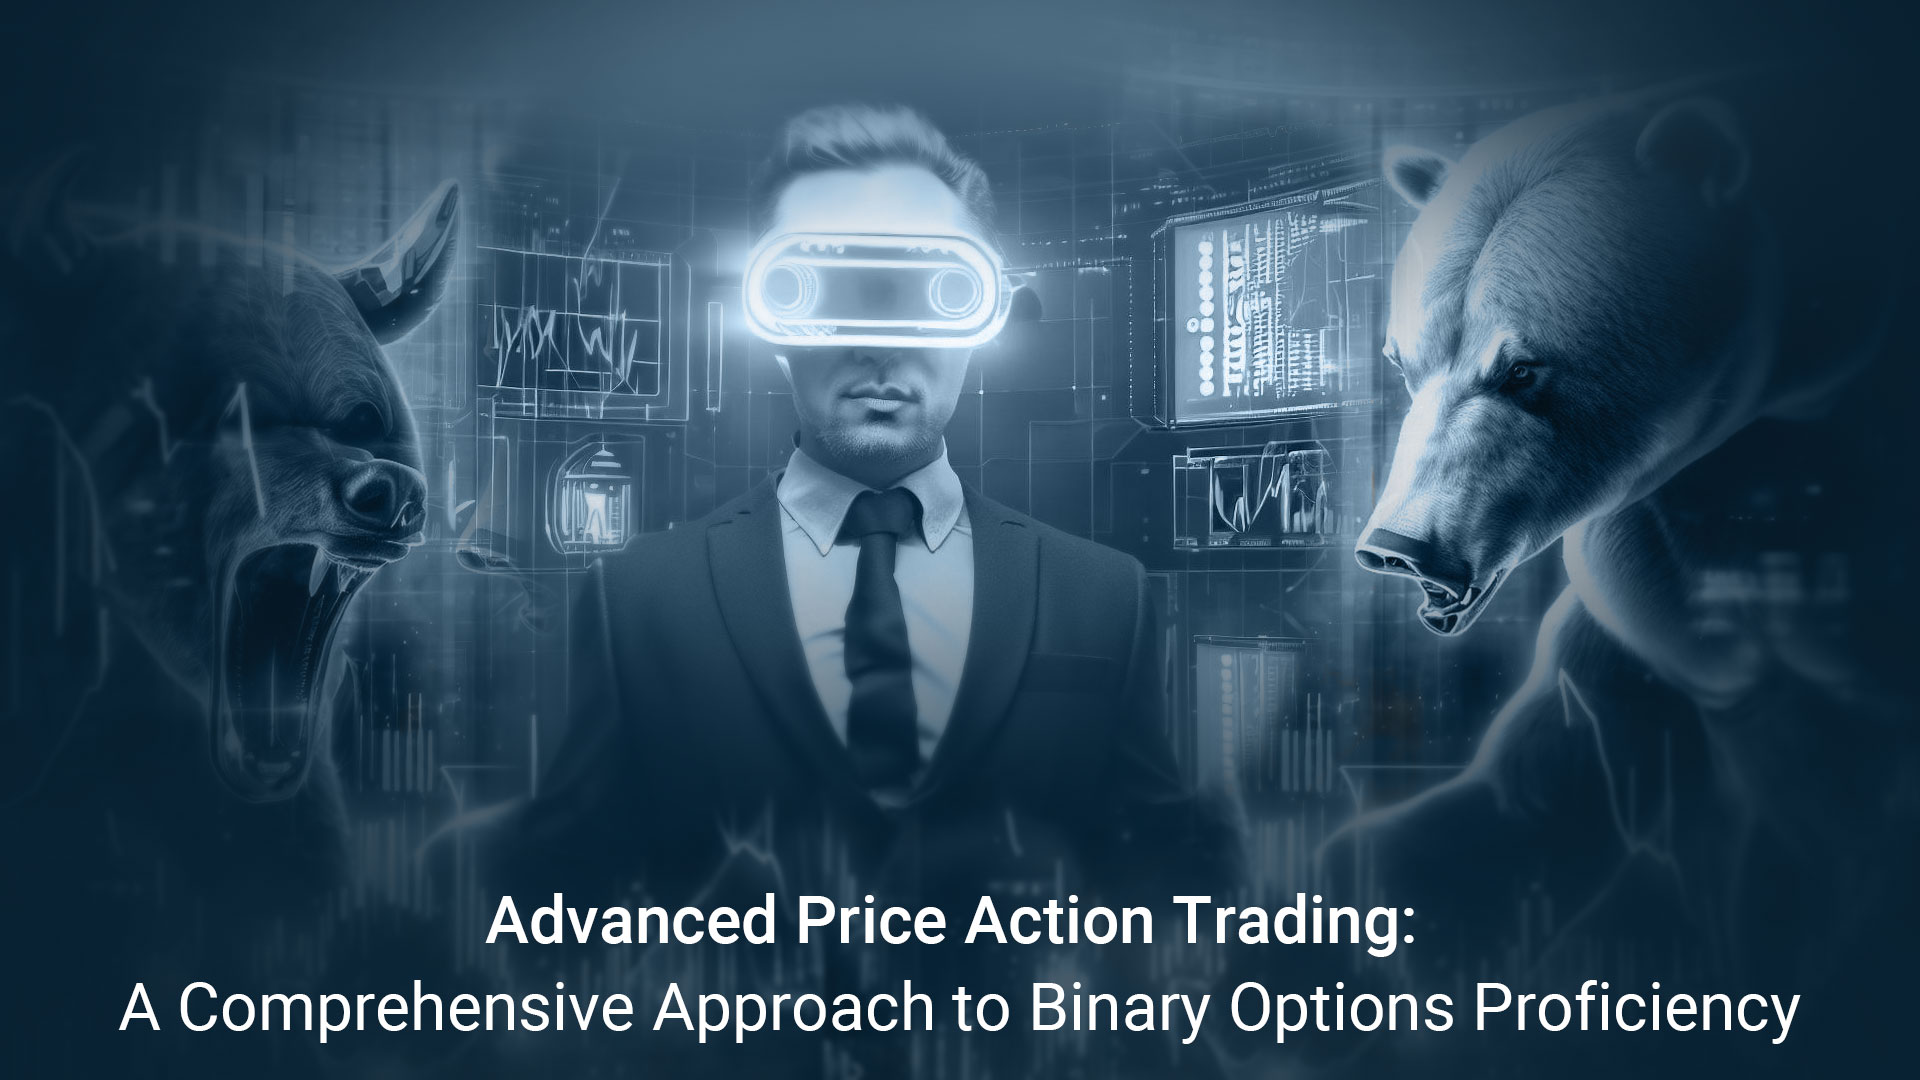 Advanced Price Action Trading: A Comprehensive Approach to Binary Options Proficiency